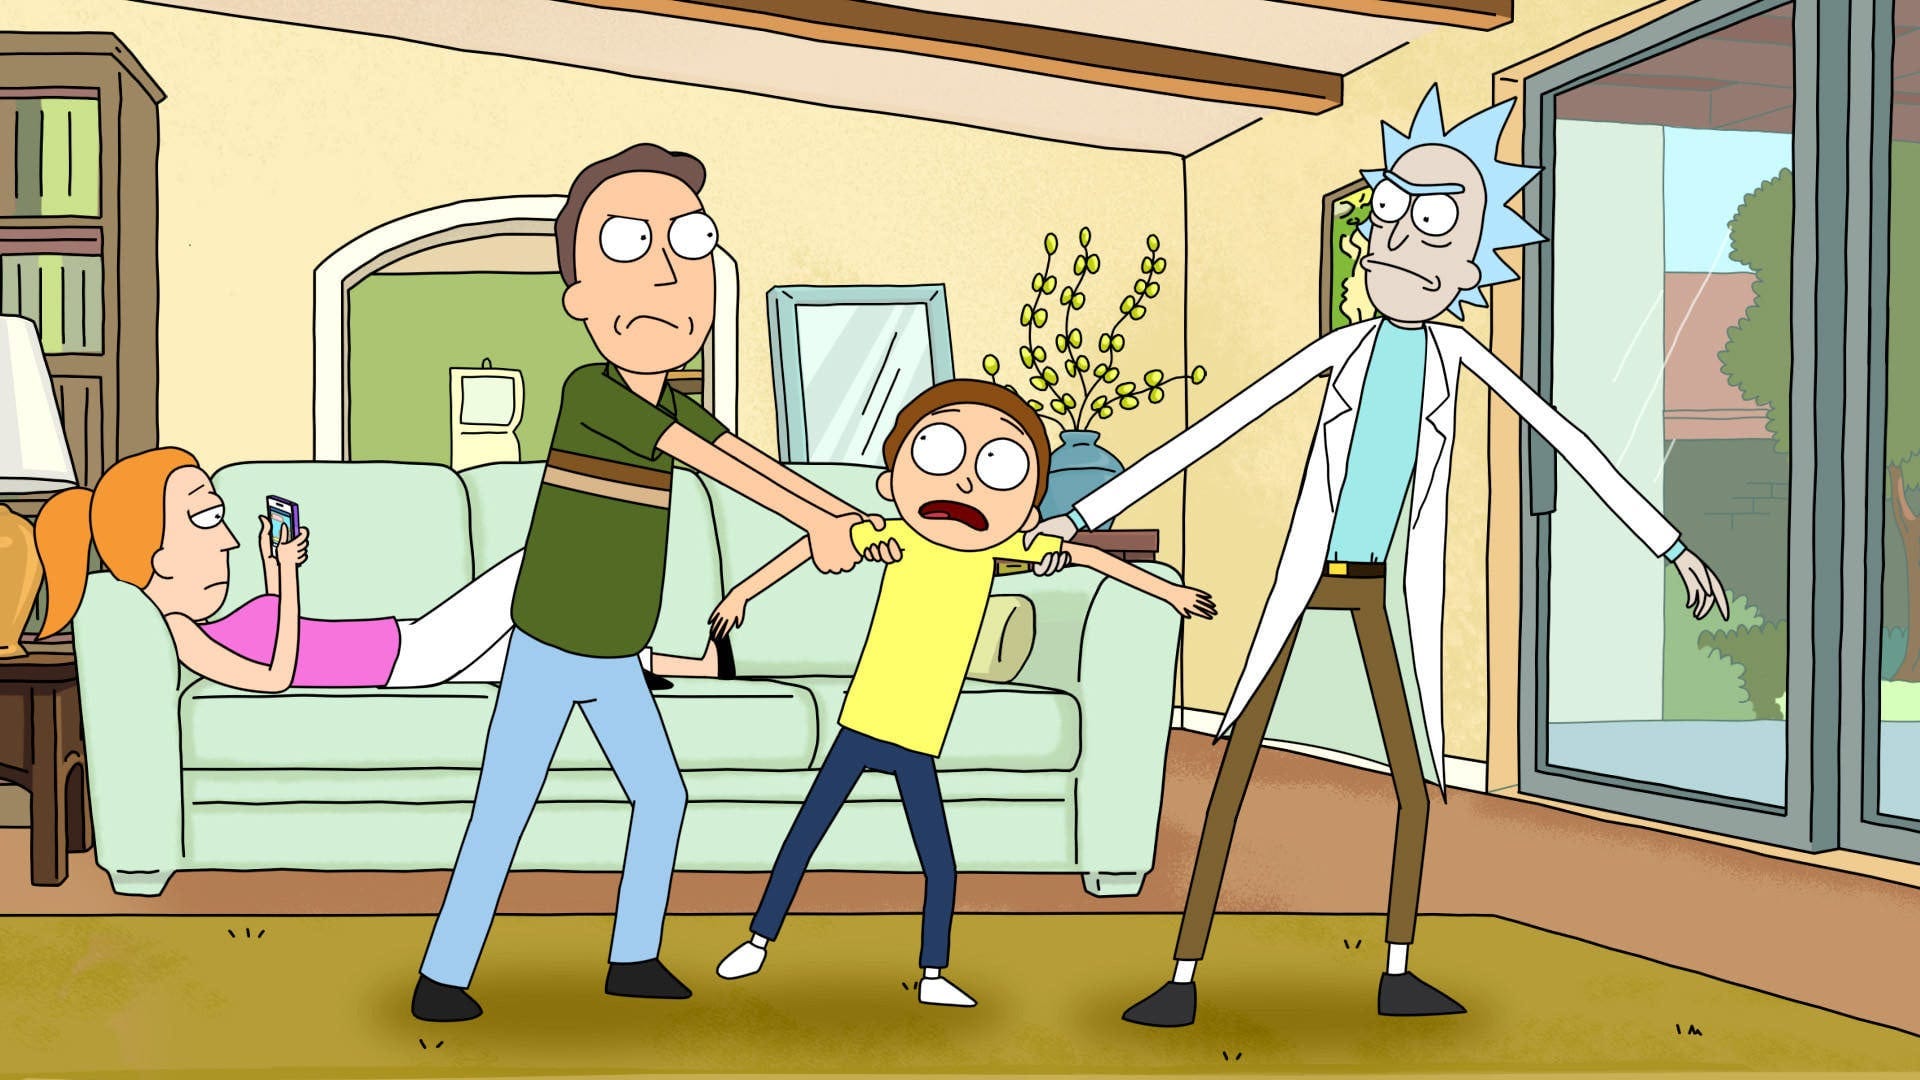 rick and morty season 1 full episodes online